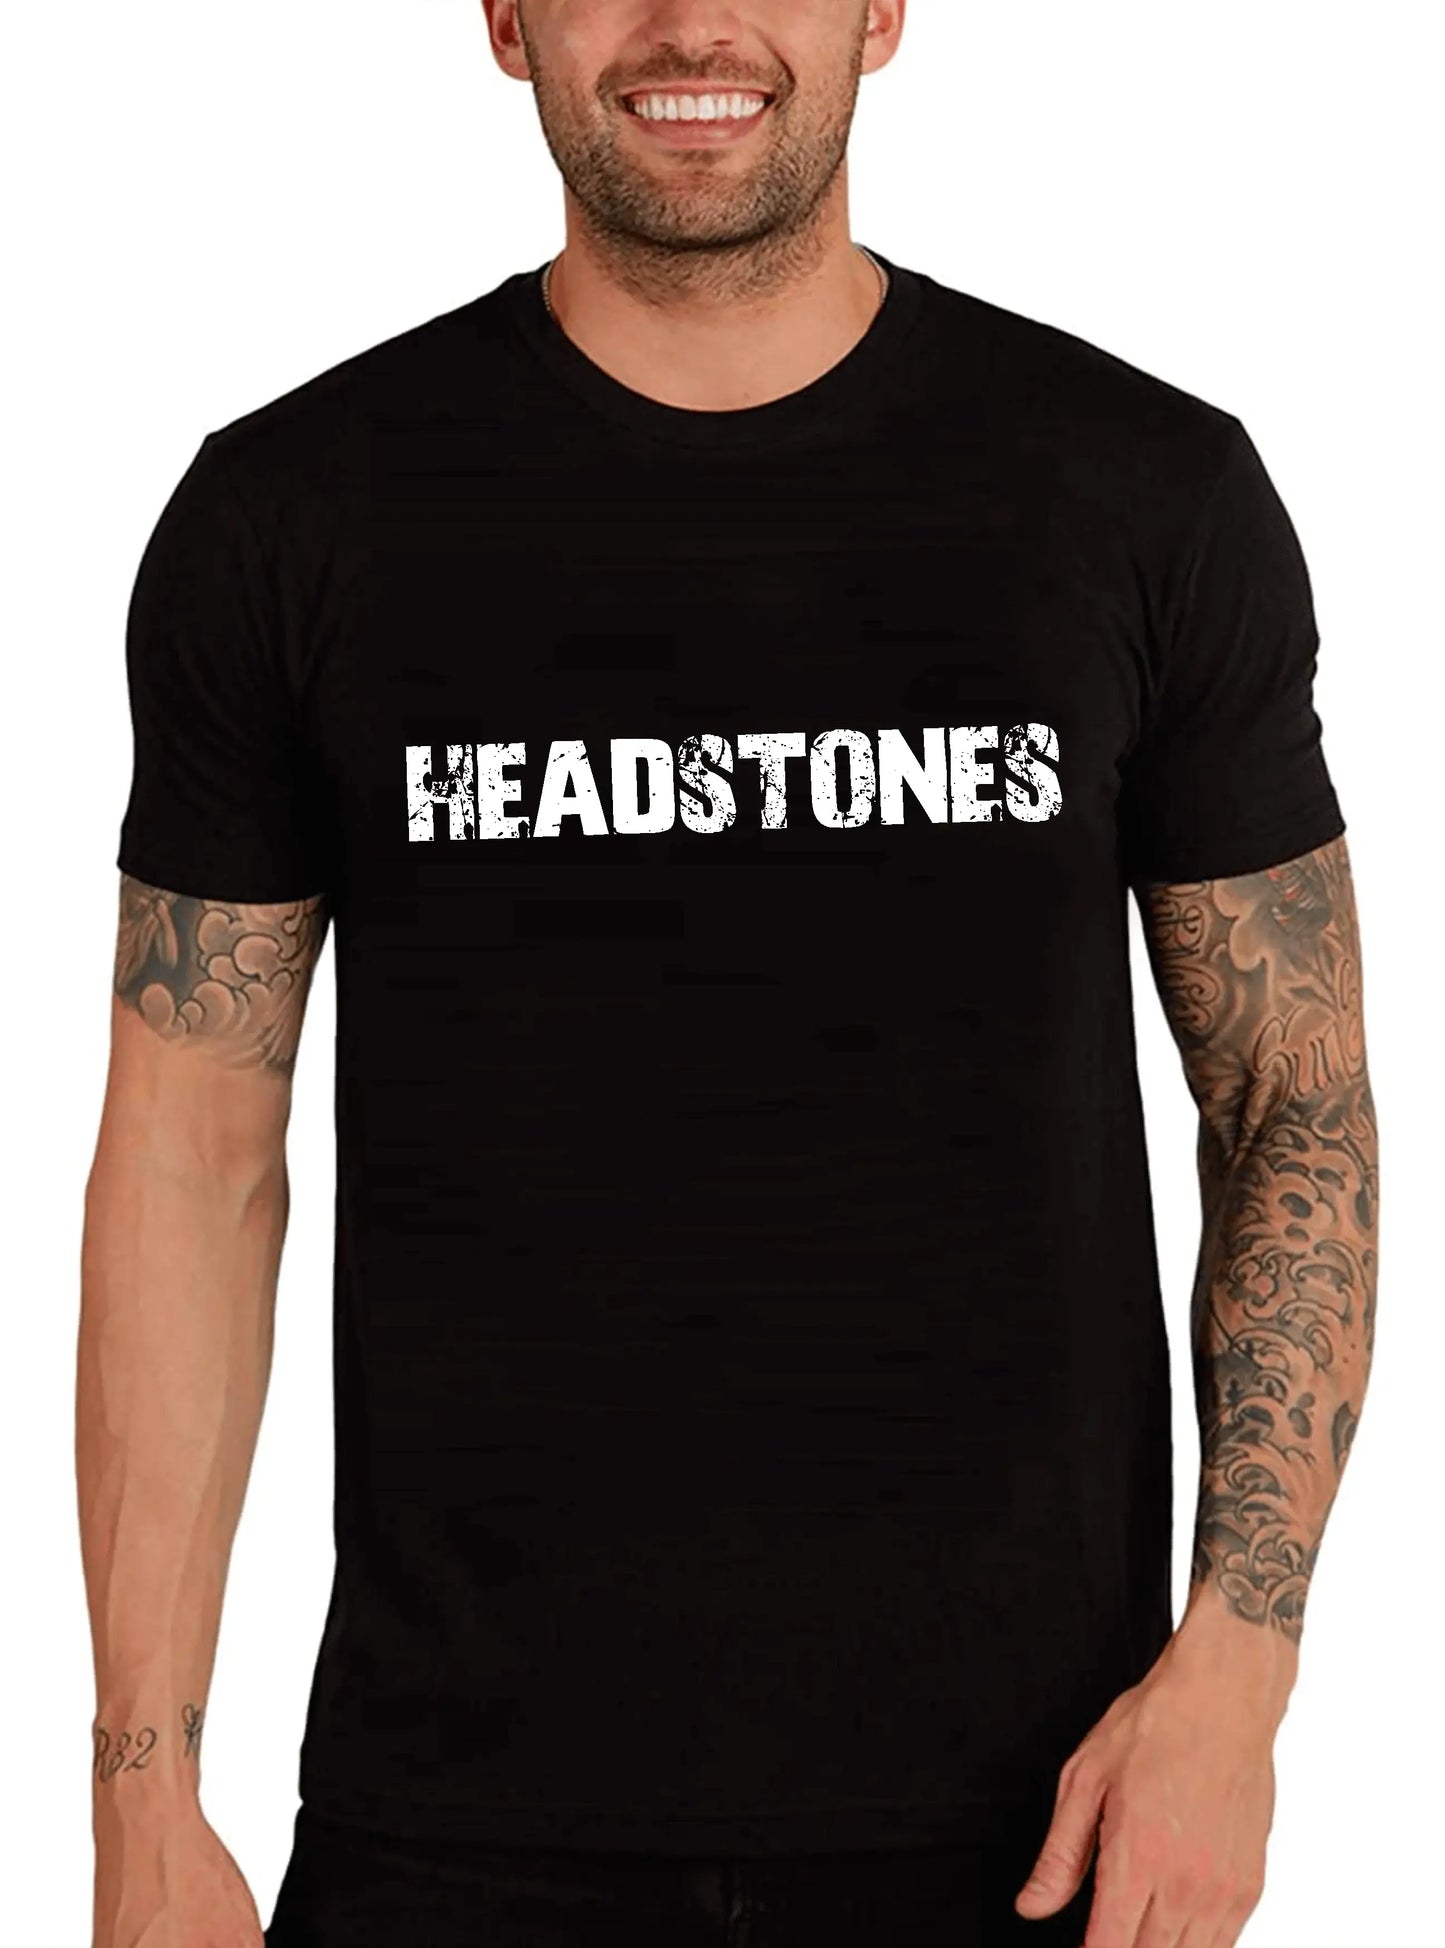 Men's Graphic T-Shirt Headstones Eco-Friendly Limited Edition Short Sleeve Tee-Shirt Vintage Birthday Gift Novelty